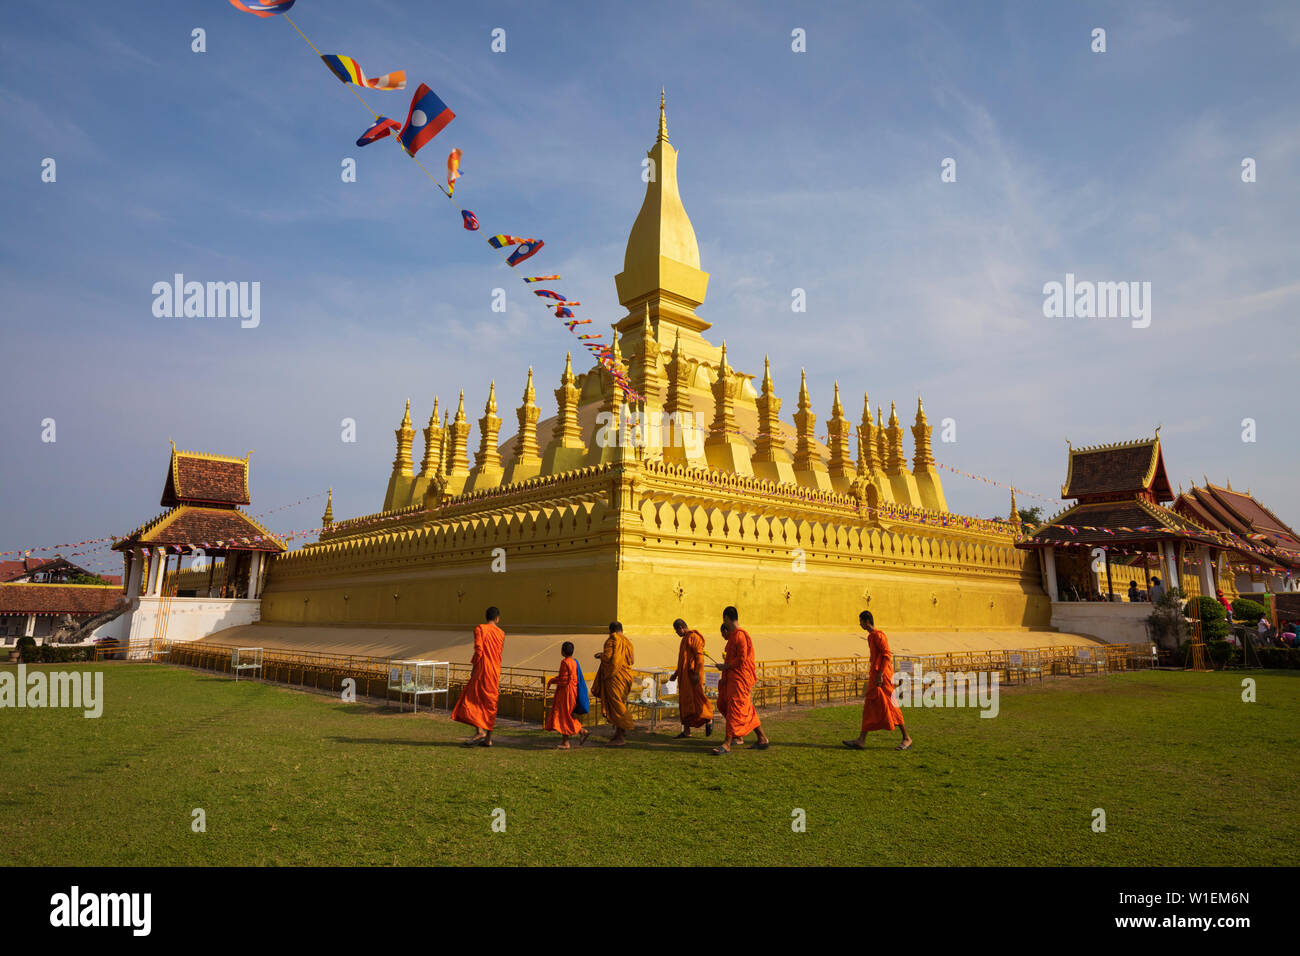 The golden Buddhist stupa of Pha That Luang with Buddhist monks walking below, Vientiane, Laos, Indochina, Southeast Asia, Asia Stock Photo